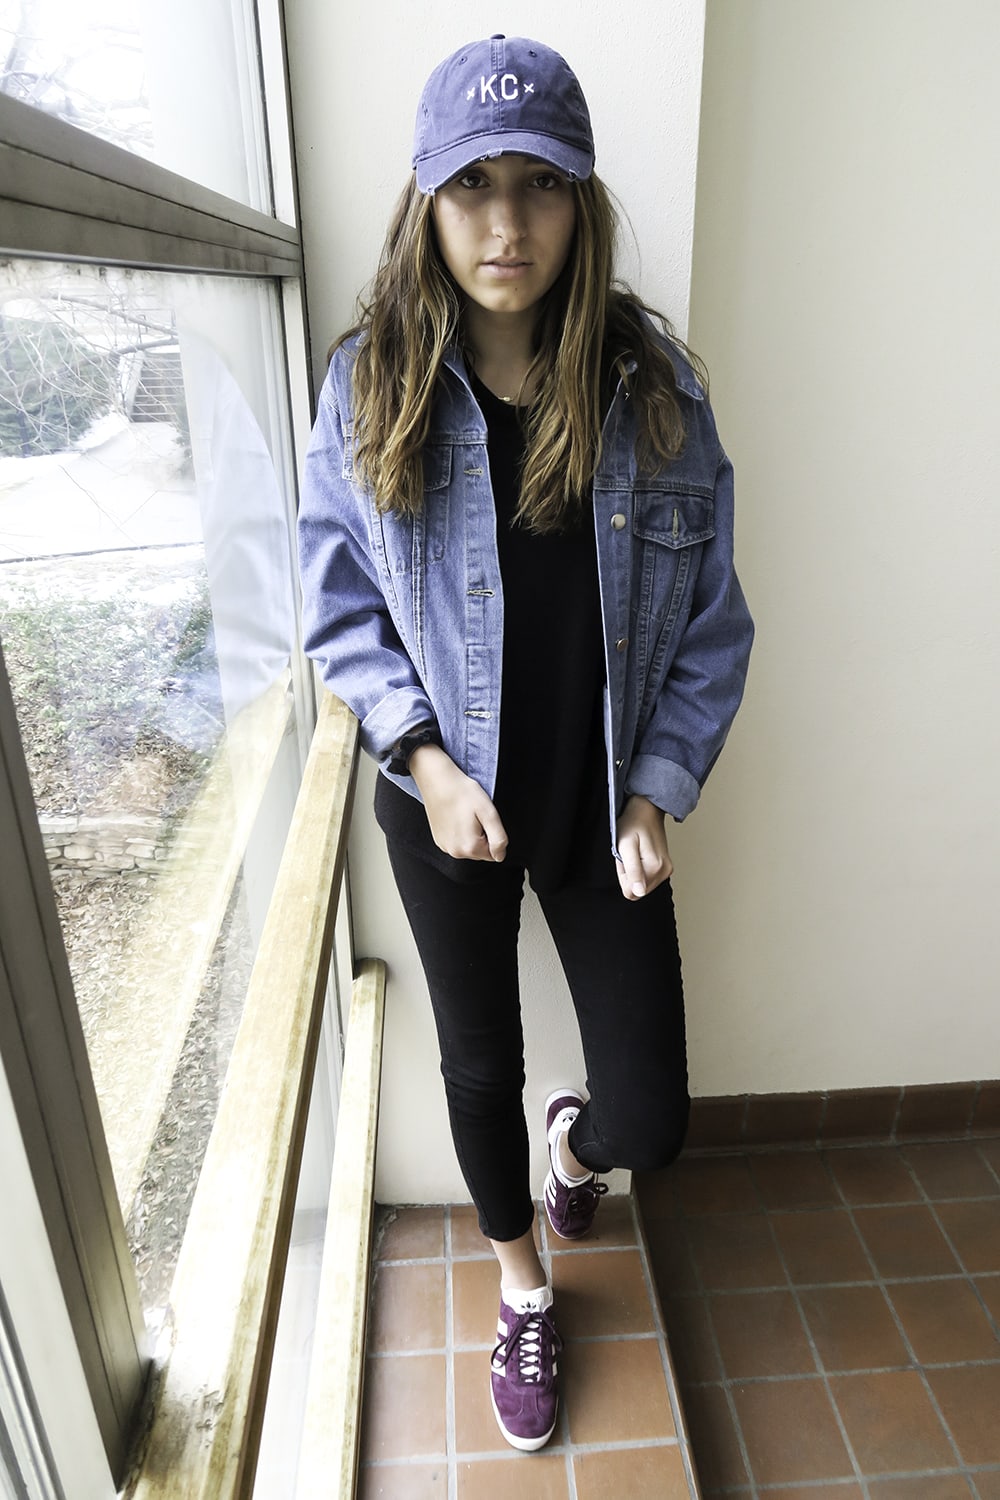 Kansas City native Hannah wears a black tee with black cuffed jeans, an oversized denim menswear jacket, and a blue KC hat. To add a pop of color, she wears magenta Adidas sneakers with her relaxed look.